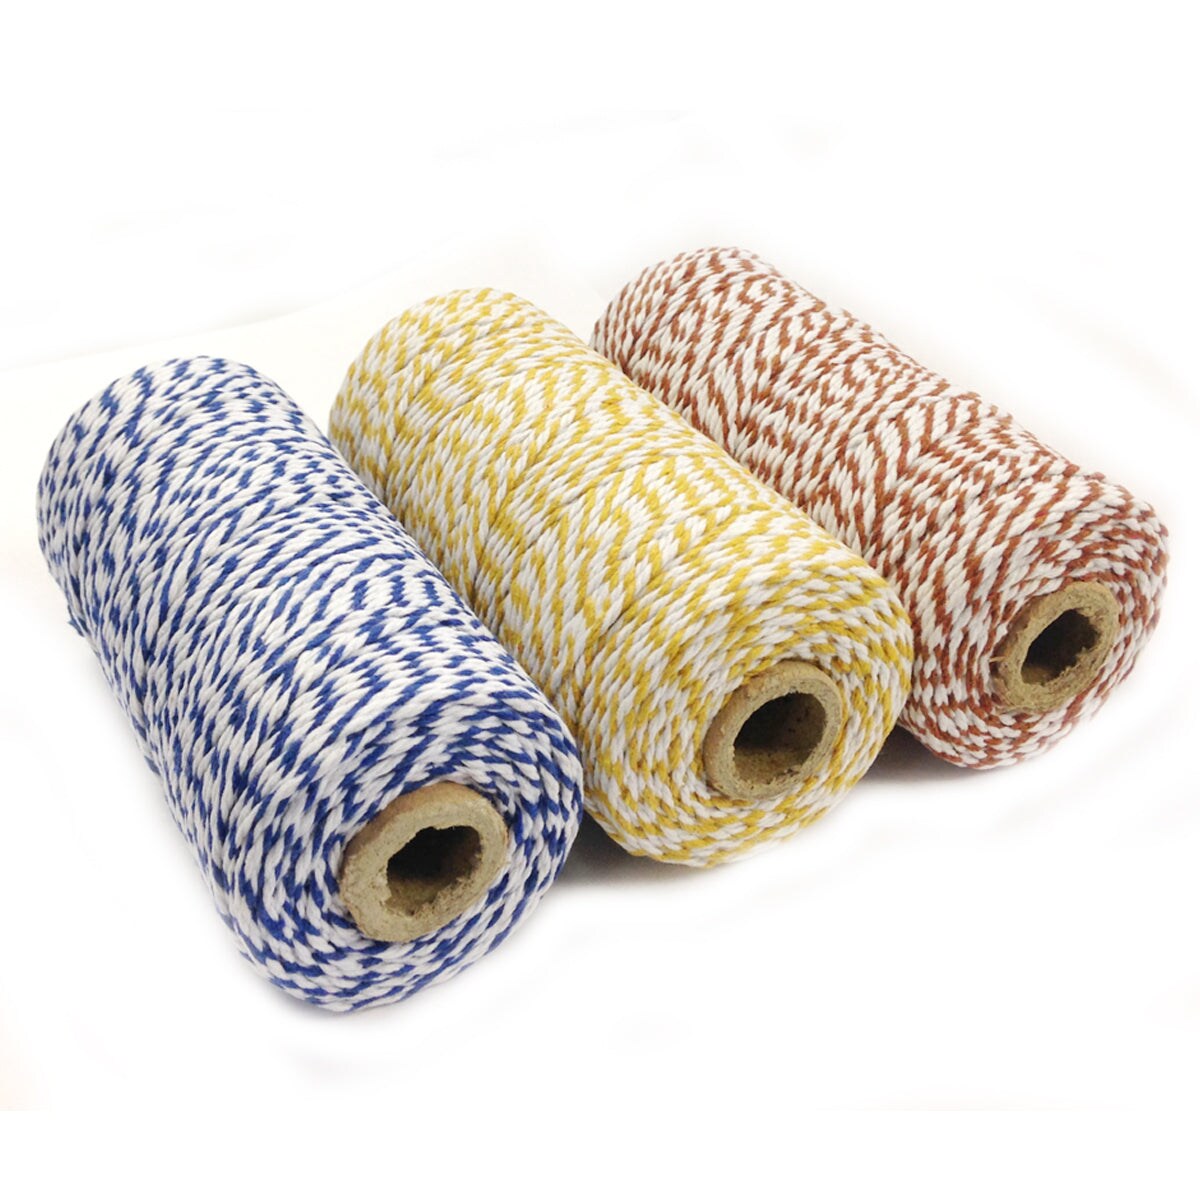 Wrapables Cotton Baker&#x27;s Twine 12ply 330 Yards (Set of 3 Spools x 110 Yards) for Gift Wrapping, Party Decor, and Arts and Crafts (Brown, Dark Yellow, Navy)